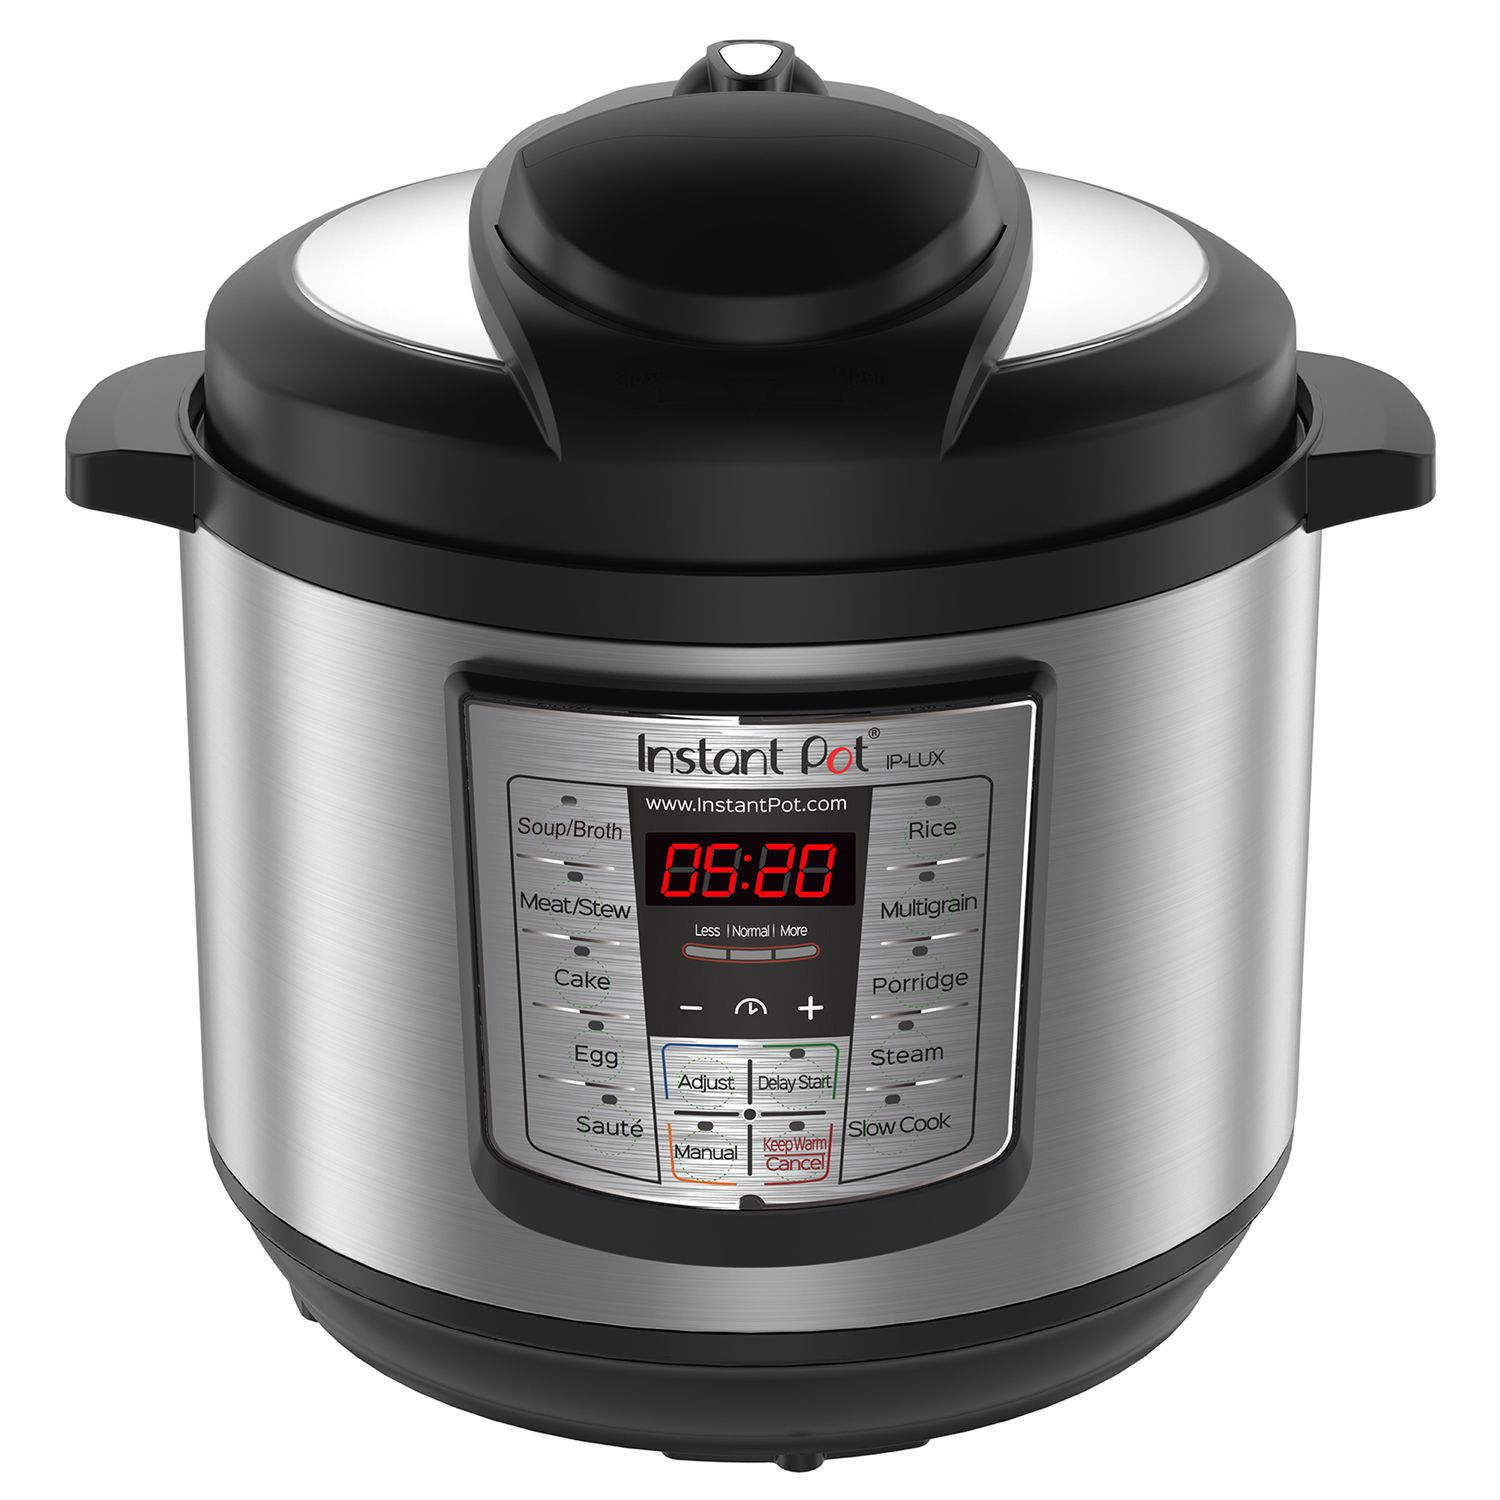 Walmart Has the Best Instant Pot Black Friday Deal at $59